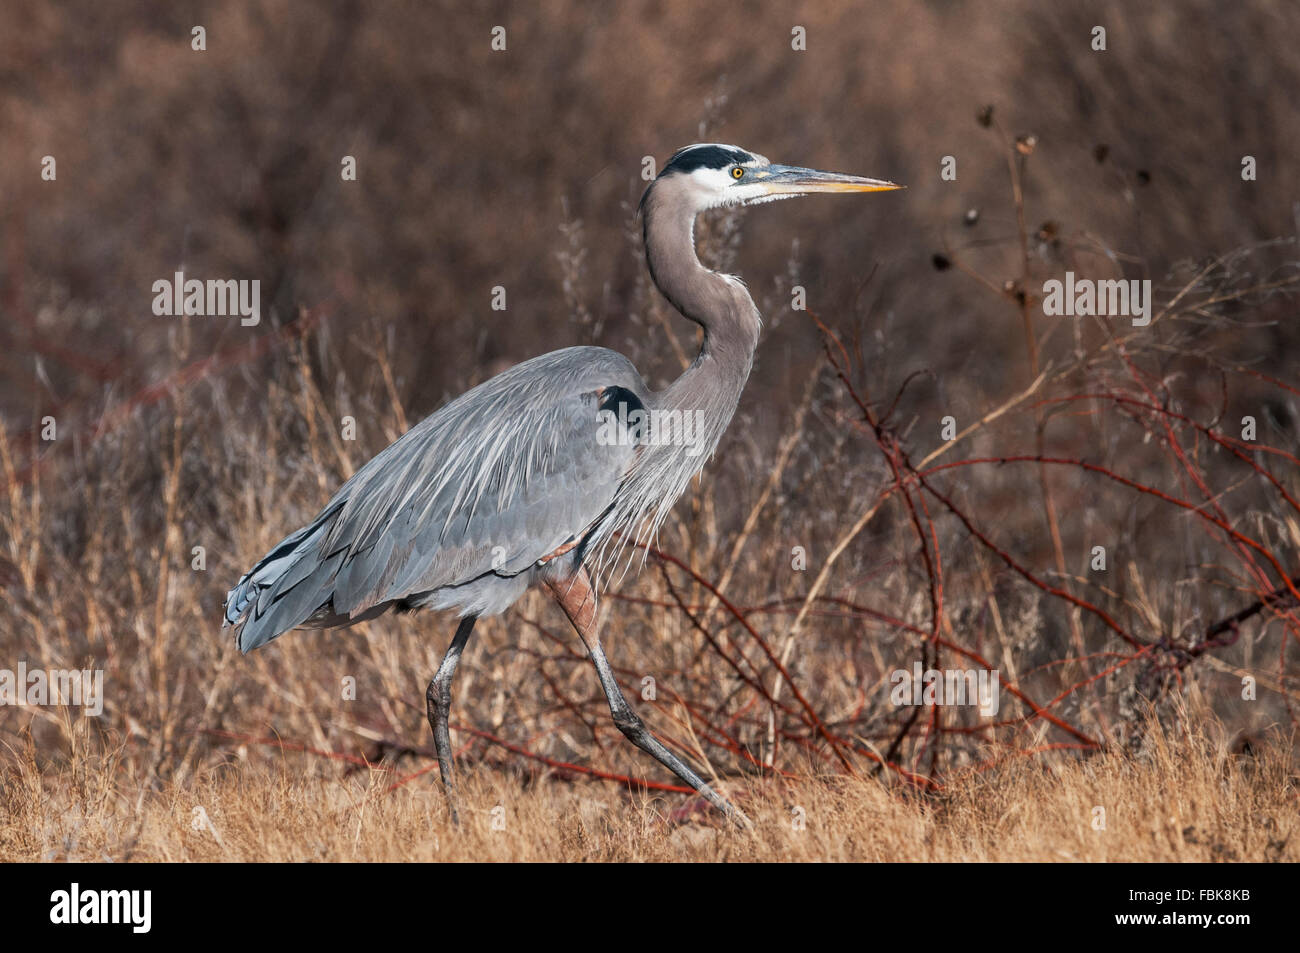 Great Blue Heron (Andea herodias) is a large wading bird common over North America and Central America near open water. Stock Photo